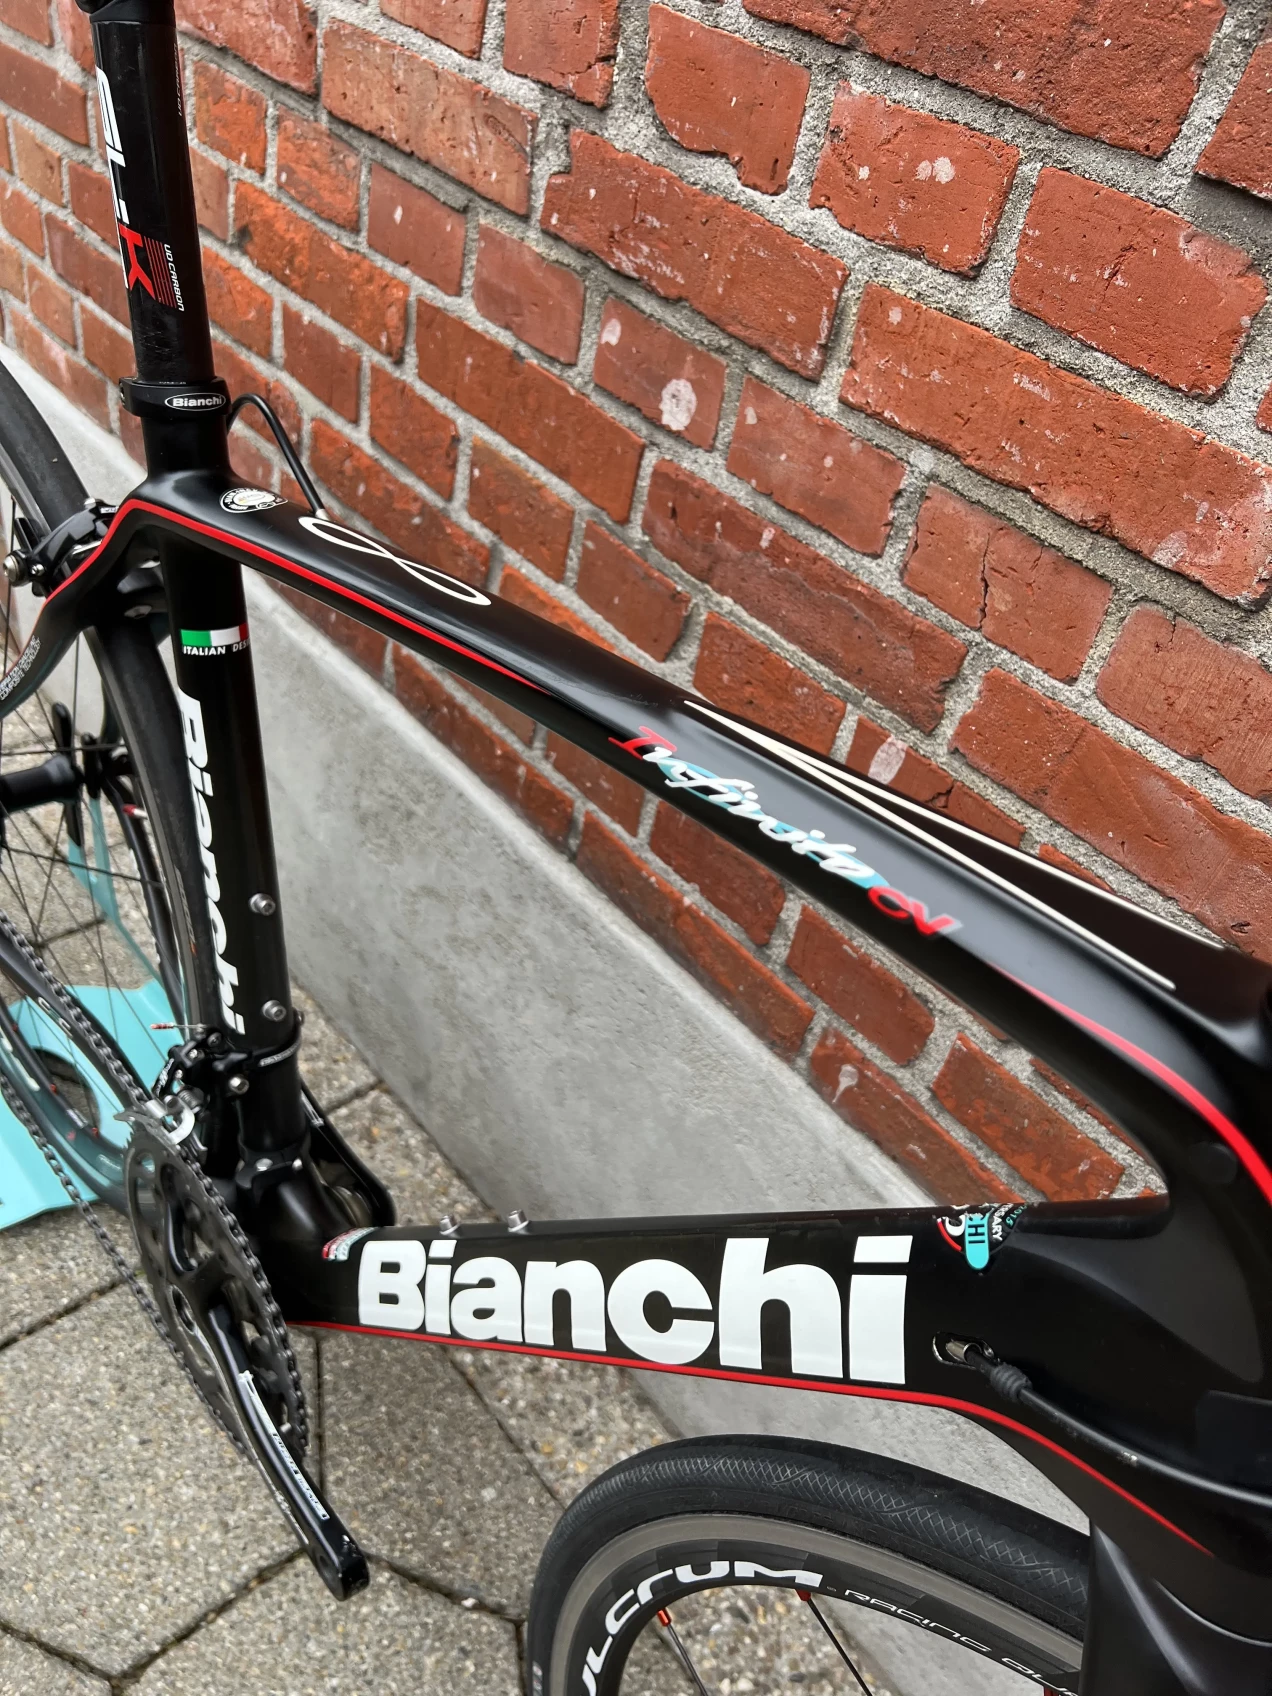 Bianchi Infinito CV used in 53 cm | buycycle